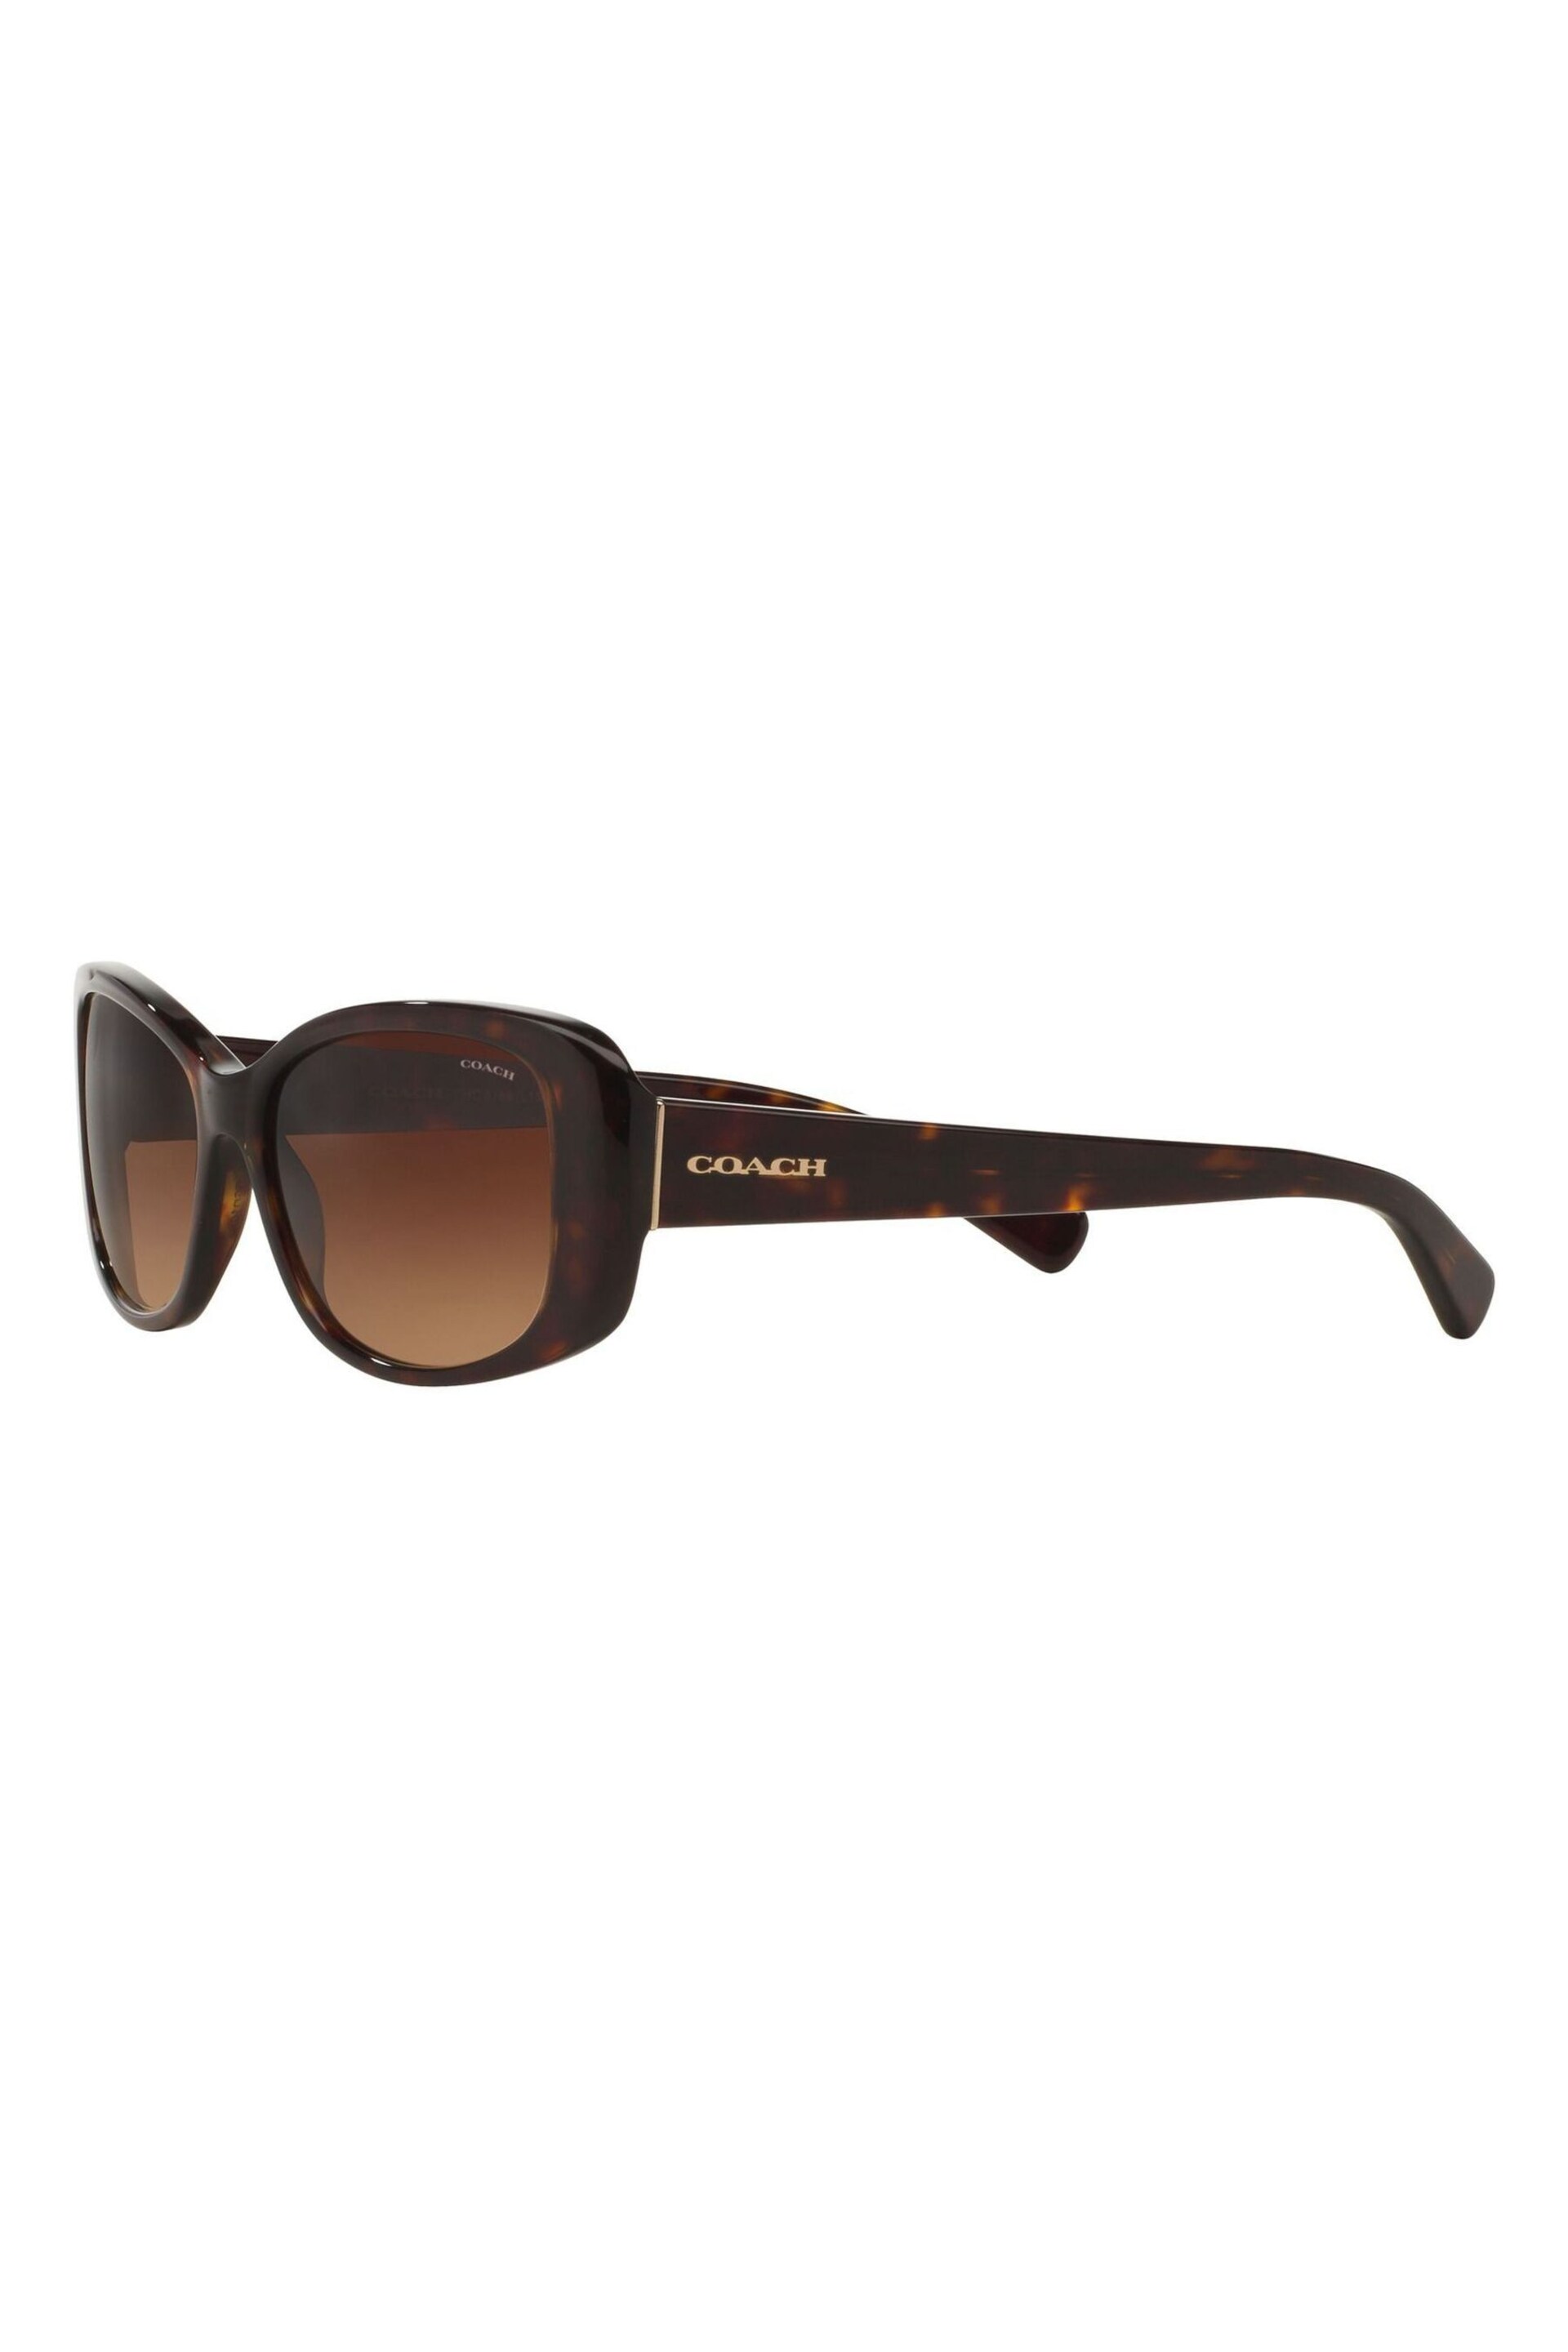 Coach Brown L156 Oval Sunglasses - Image 6 of 13